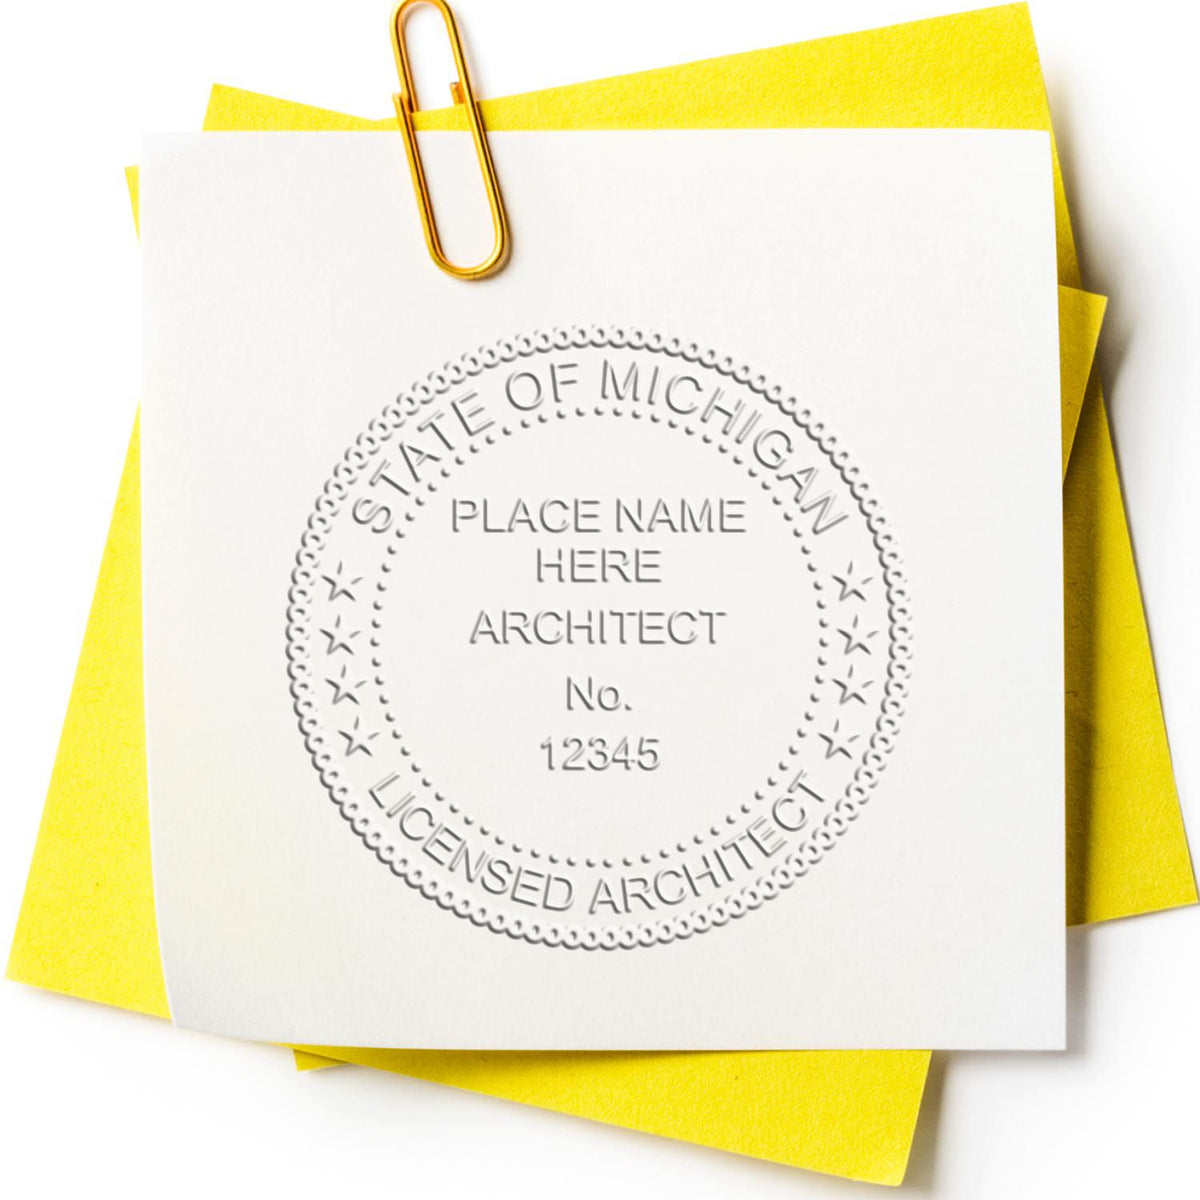 The Gift Michigan Architect Seal stamp impression comes to life with a crisp, detailed image stamped on paper - showcasing true professional quality.